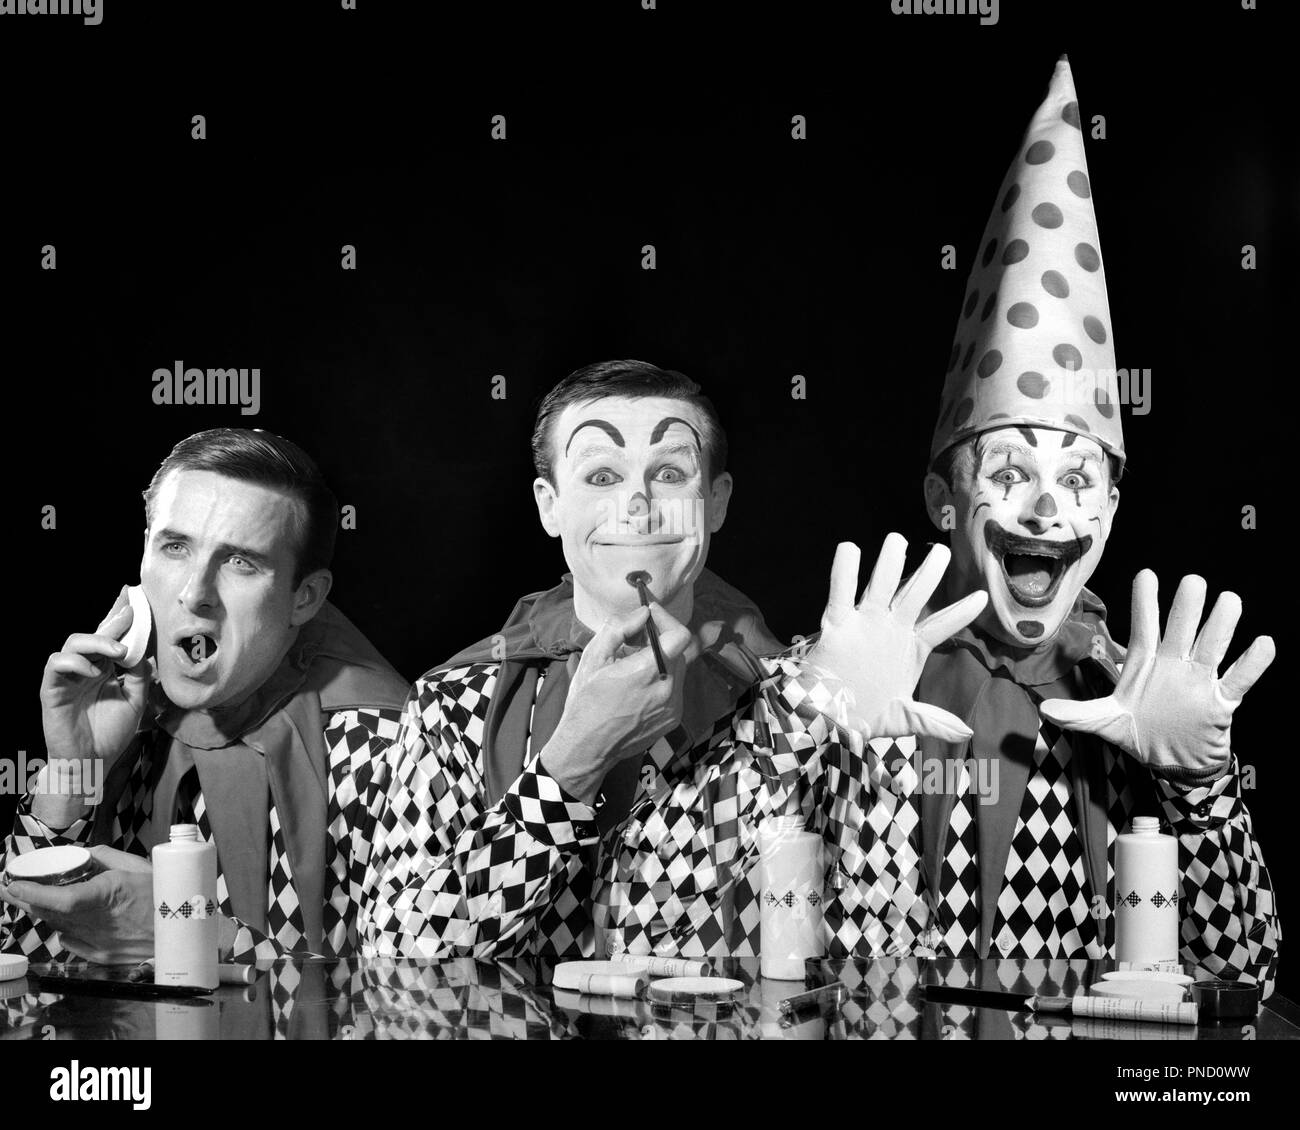 1950s 1960s TRIPTYCH COMPOSITE THREE IMAGES OF MAN CLOWN APPLYING MAKE-UP TO CLEAN FACE BEFORE DURING AFTER  - c3099 DEB001 HARS CELEBRATION JOBS STUDIO SHOT CHANGE COPY SPACE HALF-LENGTH MAKEUP PERSONS MALES ENTERTAINMENT CONFIDENCE EXPRESSIONS B&W CLOWNS EYE CONTACT PERFORMING ARTS SKILL BEFORE OCCUPATION HAPPINESS SKILLS MAKE-UP WEIRD HEAD AND SHOULDERS PERFORMER COMPOSITE TRADITION ZANY UNCONVENTIONAL OF ENTERTAINER OCCUPATIONS POLITICS TRIPLE WHITEFACE CONNECTION COULROPHOBIA CONCEPTUAL MULTIPLE EXPOSURE ACTORS STYLISH VARIATION DEB001 IDIOSYNCRATIC IMAGES AMUSING CREATIVITY ECCENTRIC Stock Photo